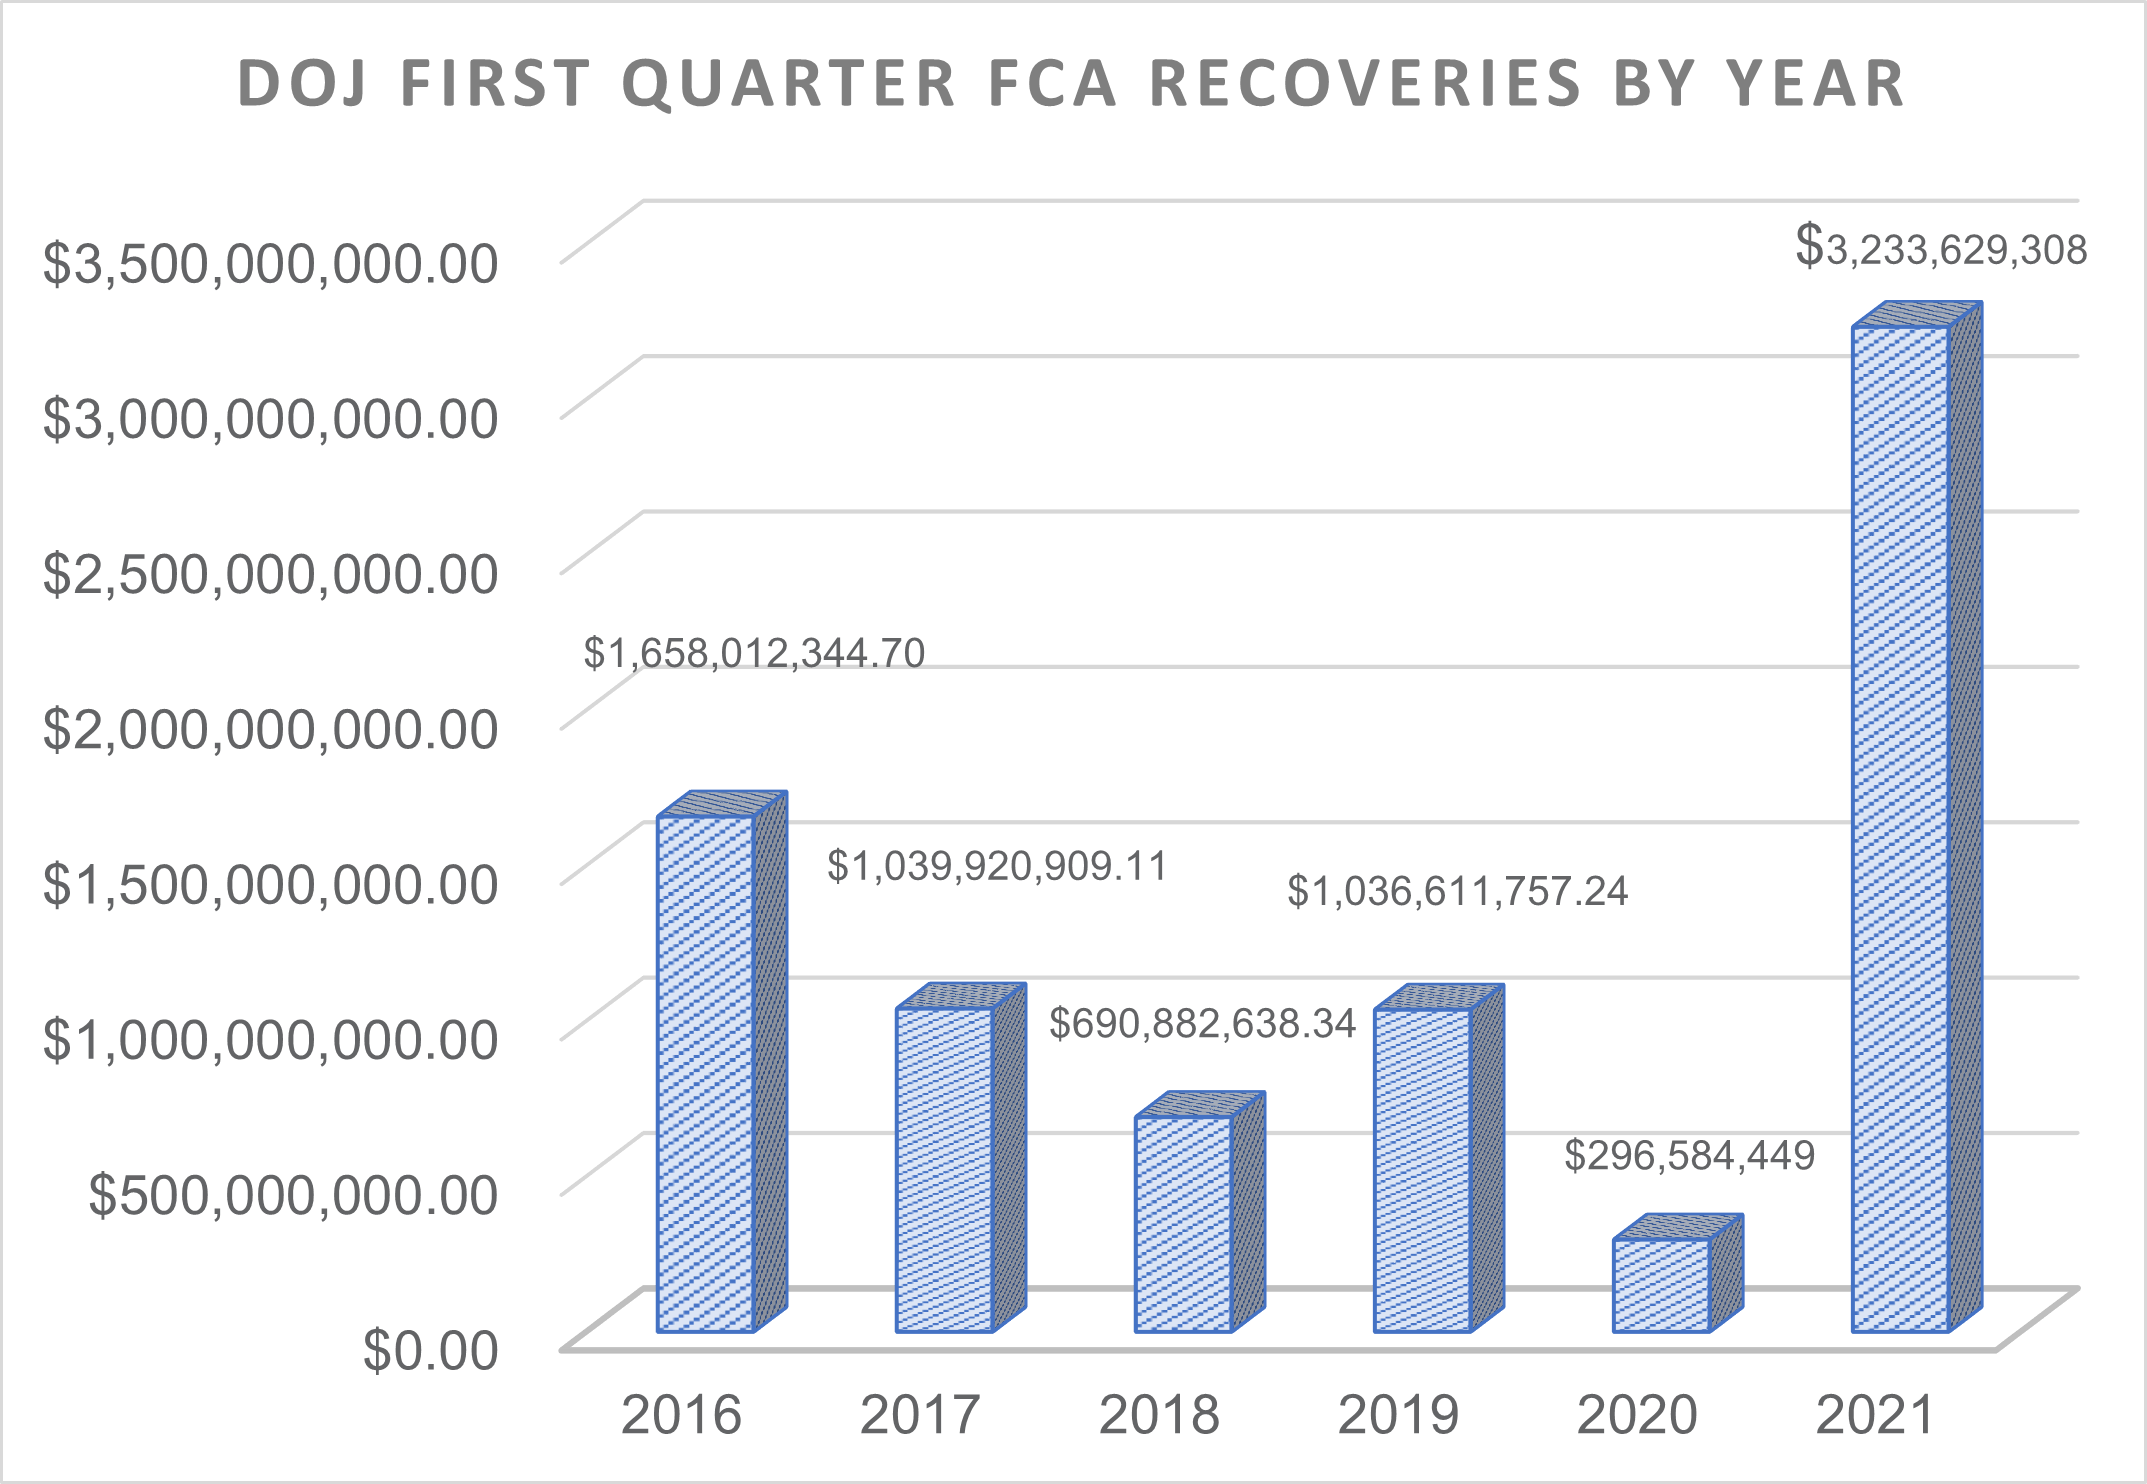 Bar chart showing DOJ's first quarter False Claims Act recoveries by year